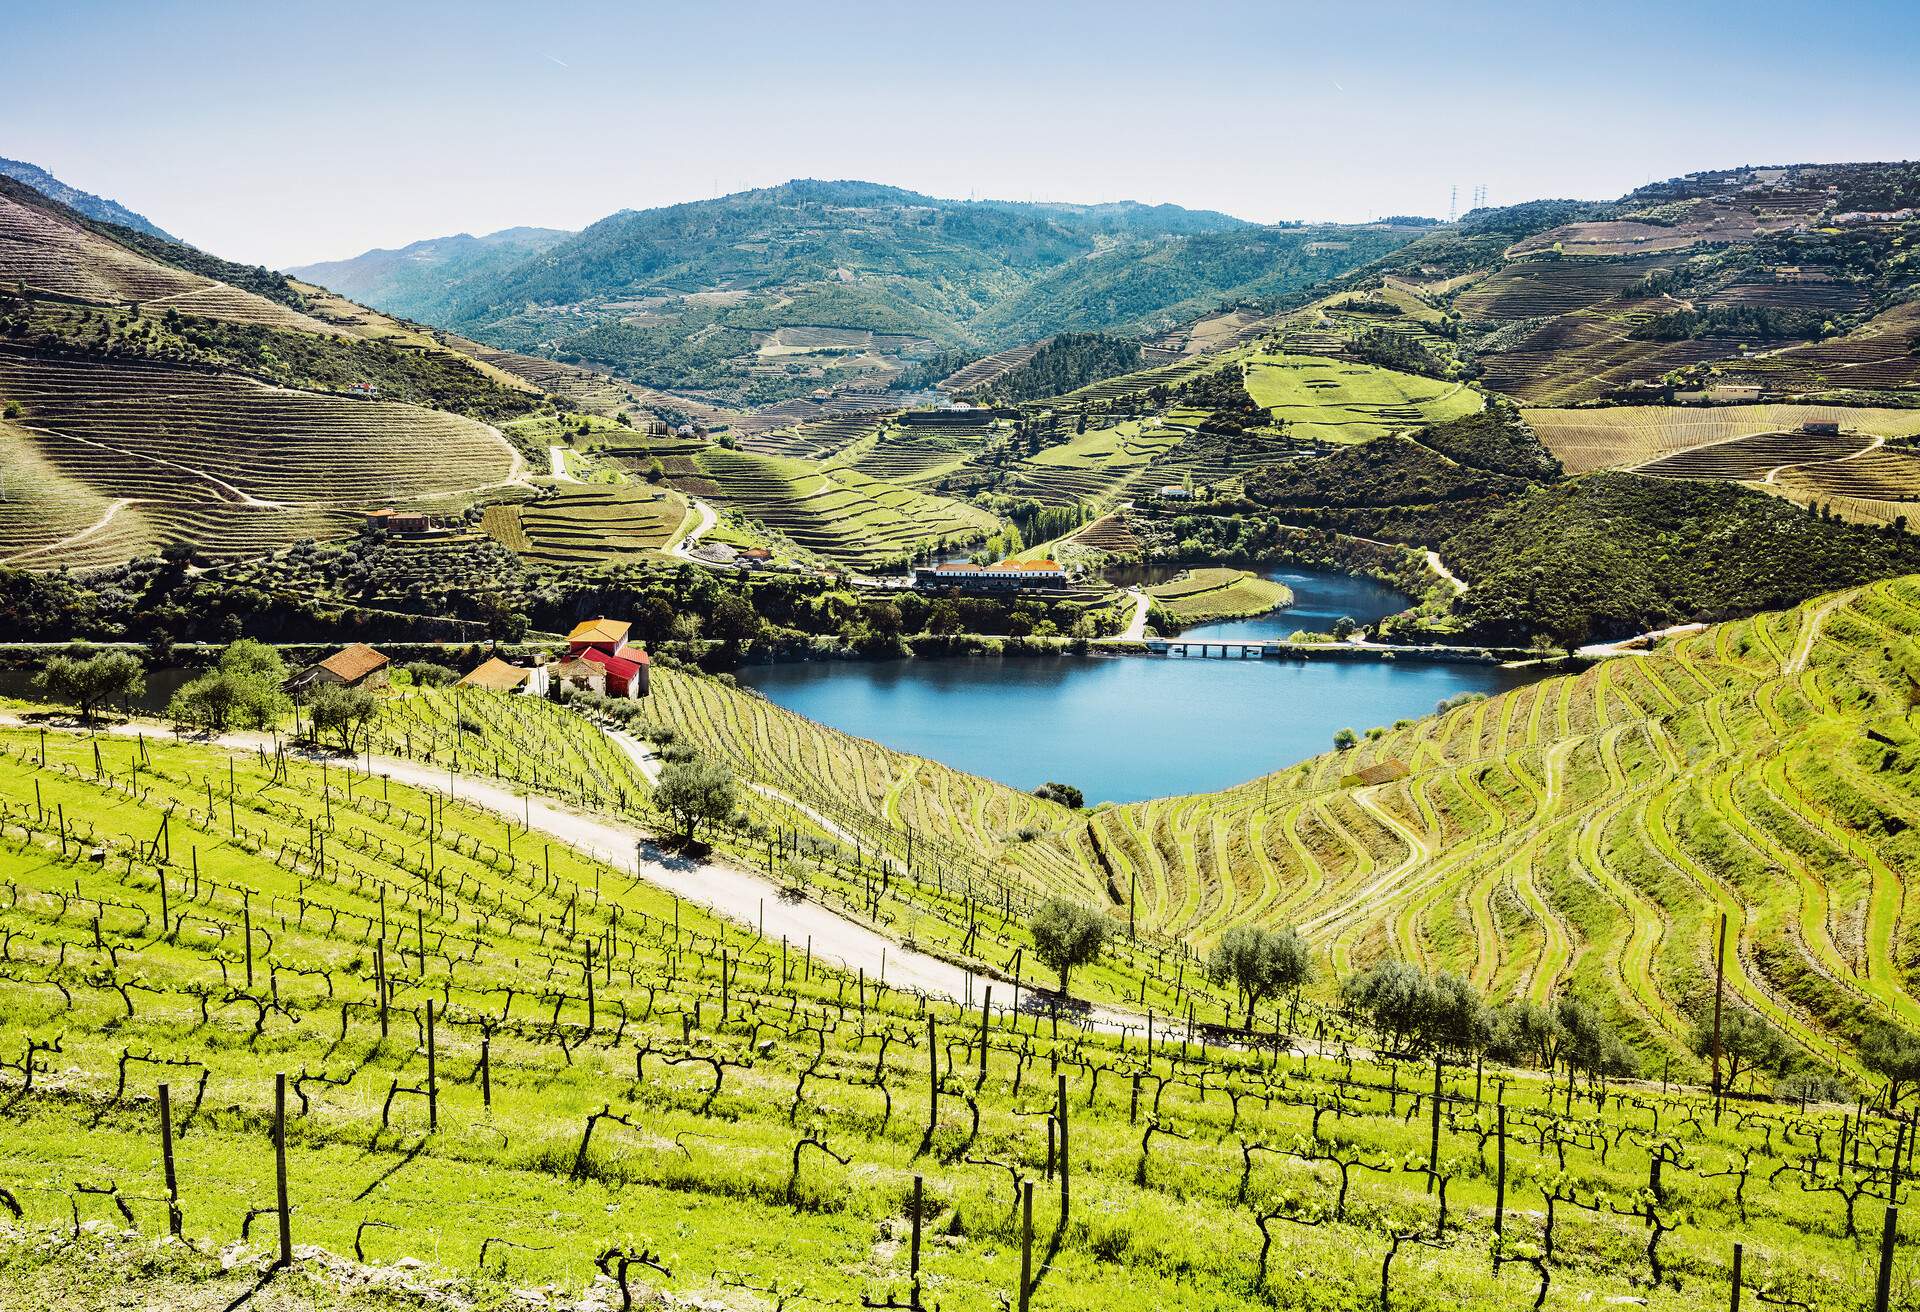 A calm river surrounded by terraced hills and valleys of vineyards.